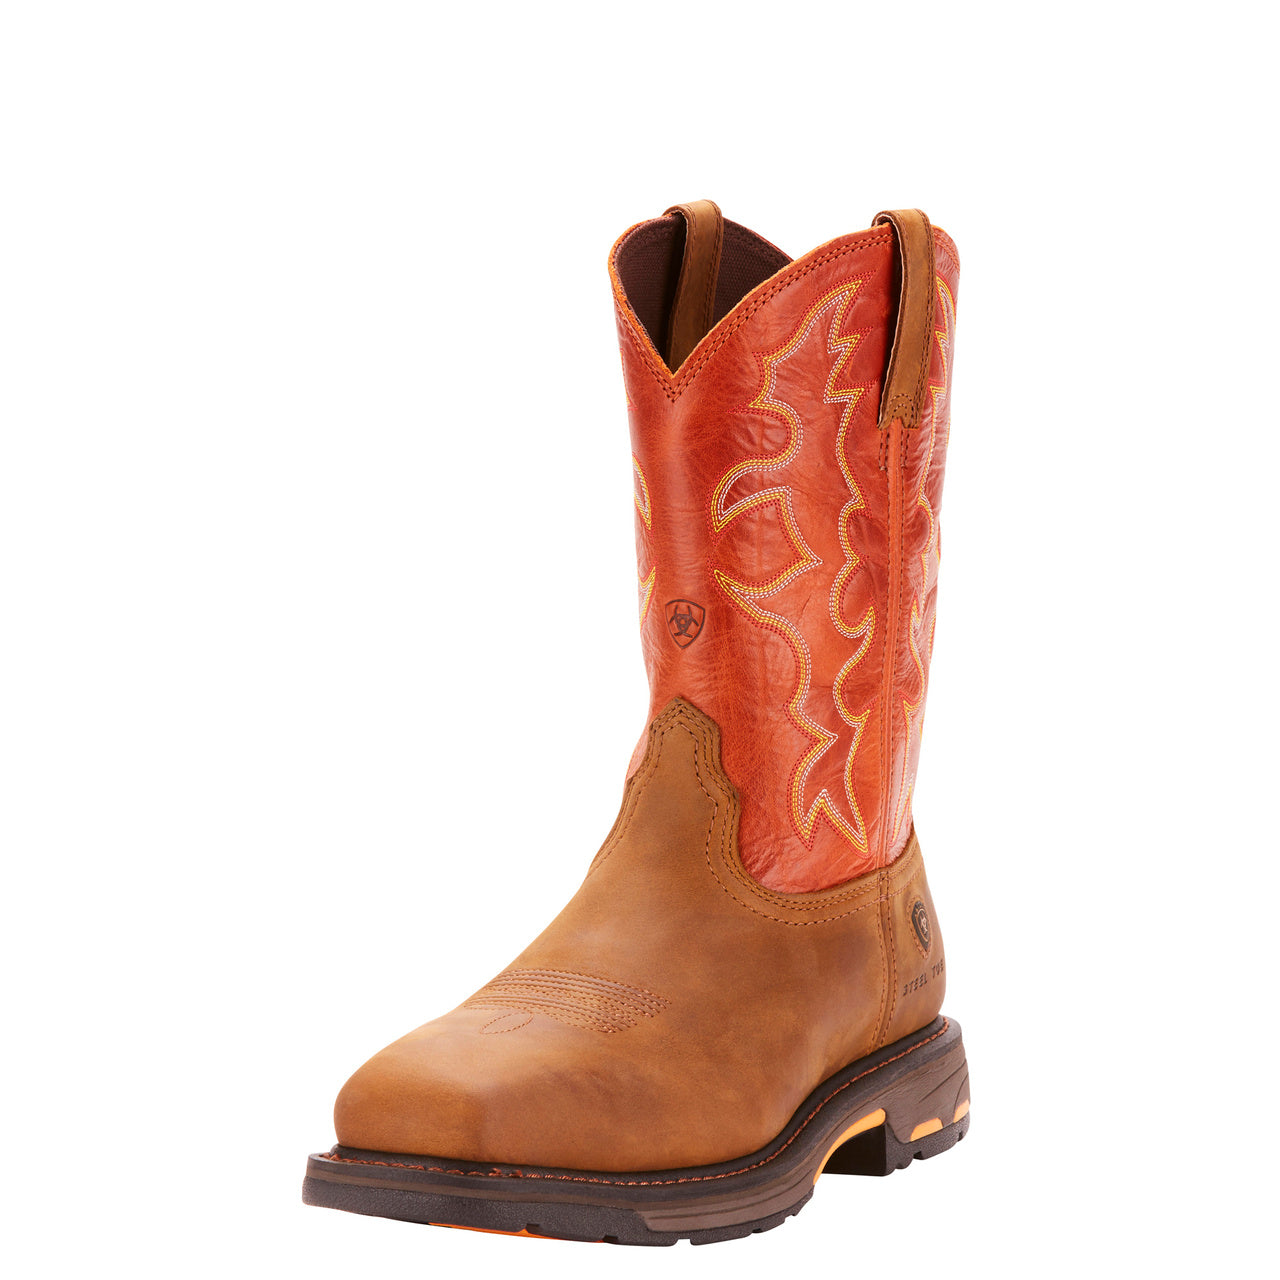 Ariat Workhog Wide Square Toe Boot 8.5 D